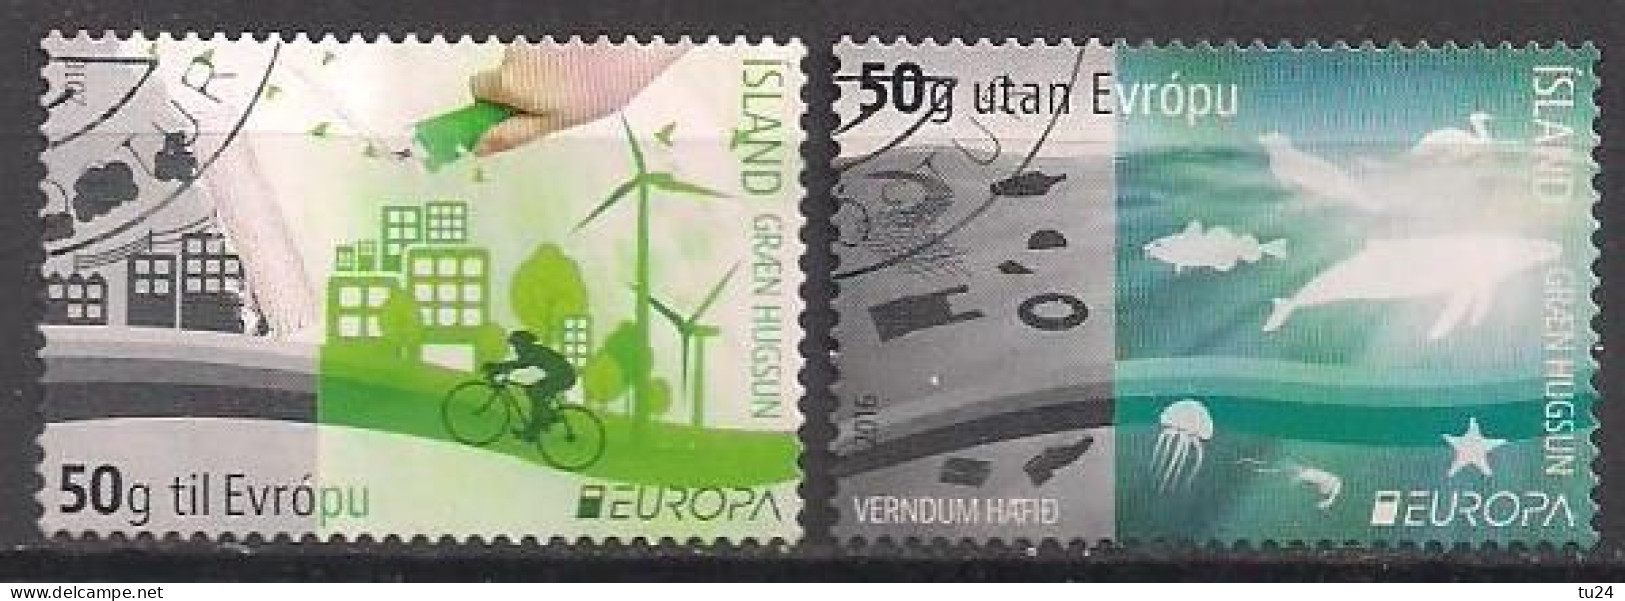 Island  (2016)  Mi.Nr.  1495 + 1496  Gest. / Used  (4he06)  EUROPA / MH / From Booklet - Usati